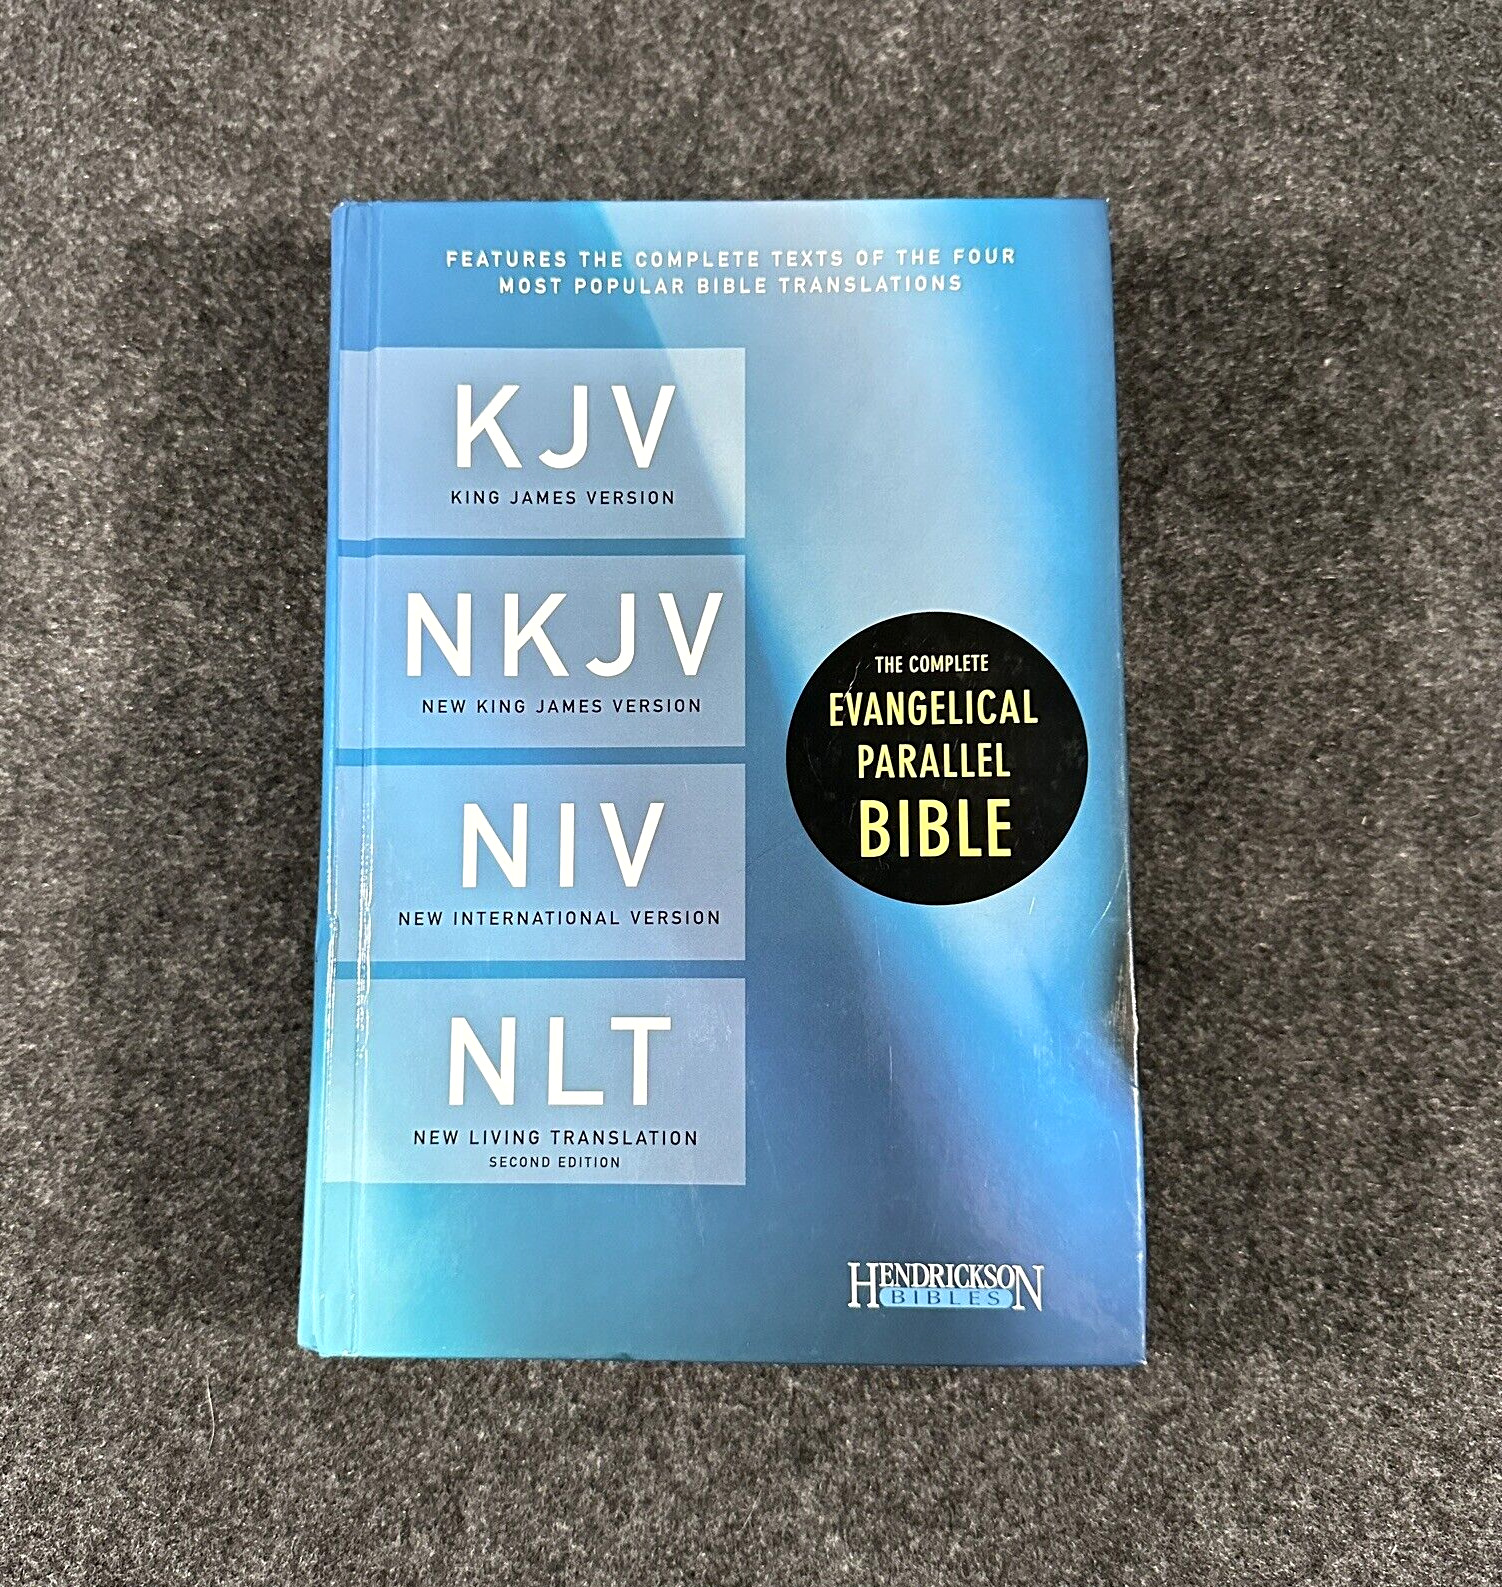 The Complete Evangelical Parallel Bible: King James Vers. +3 more - Hendrickson